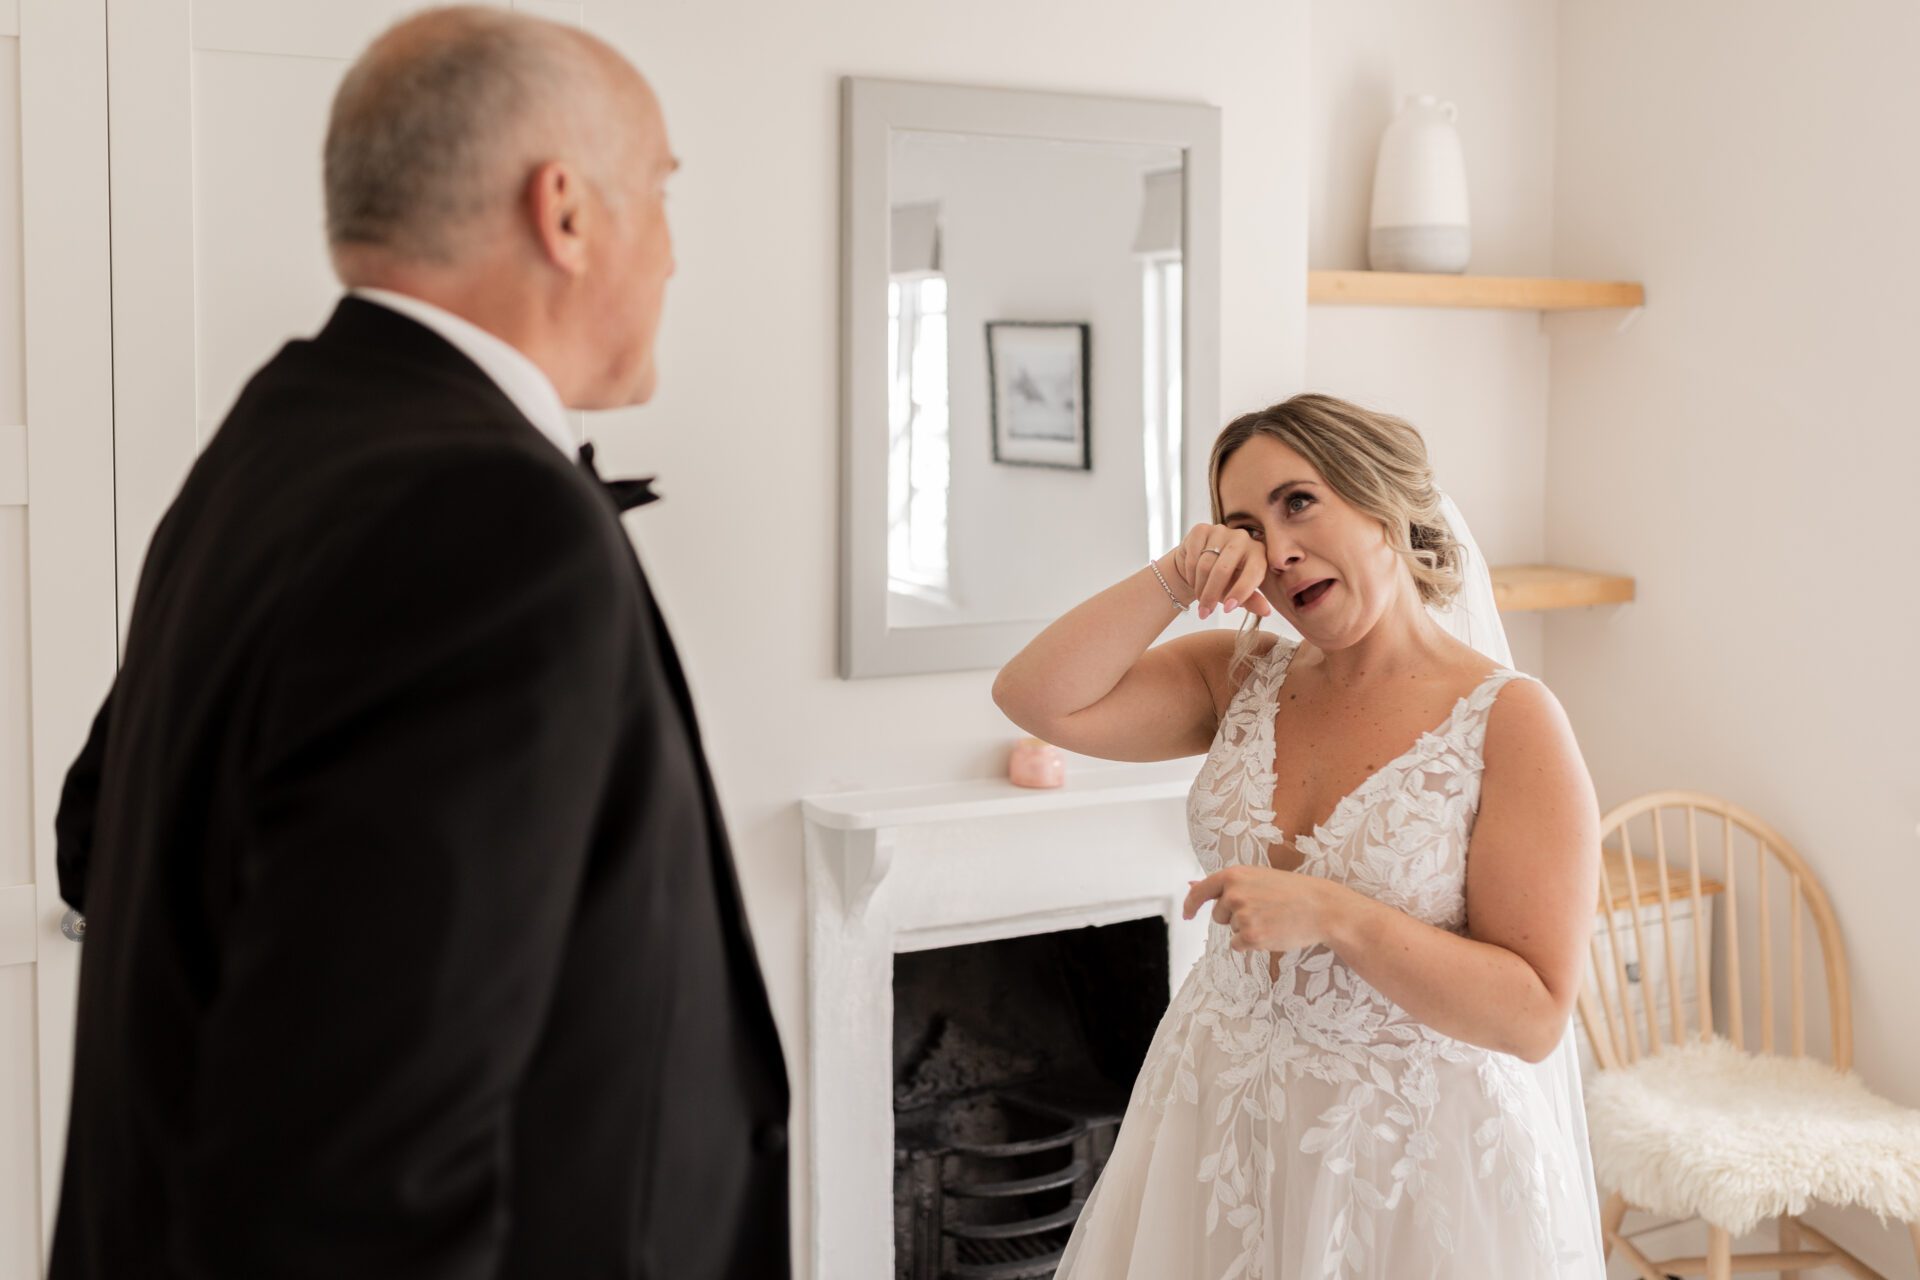 The bride sheds a tear during a first look with her father